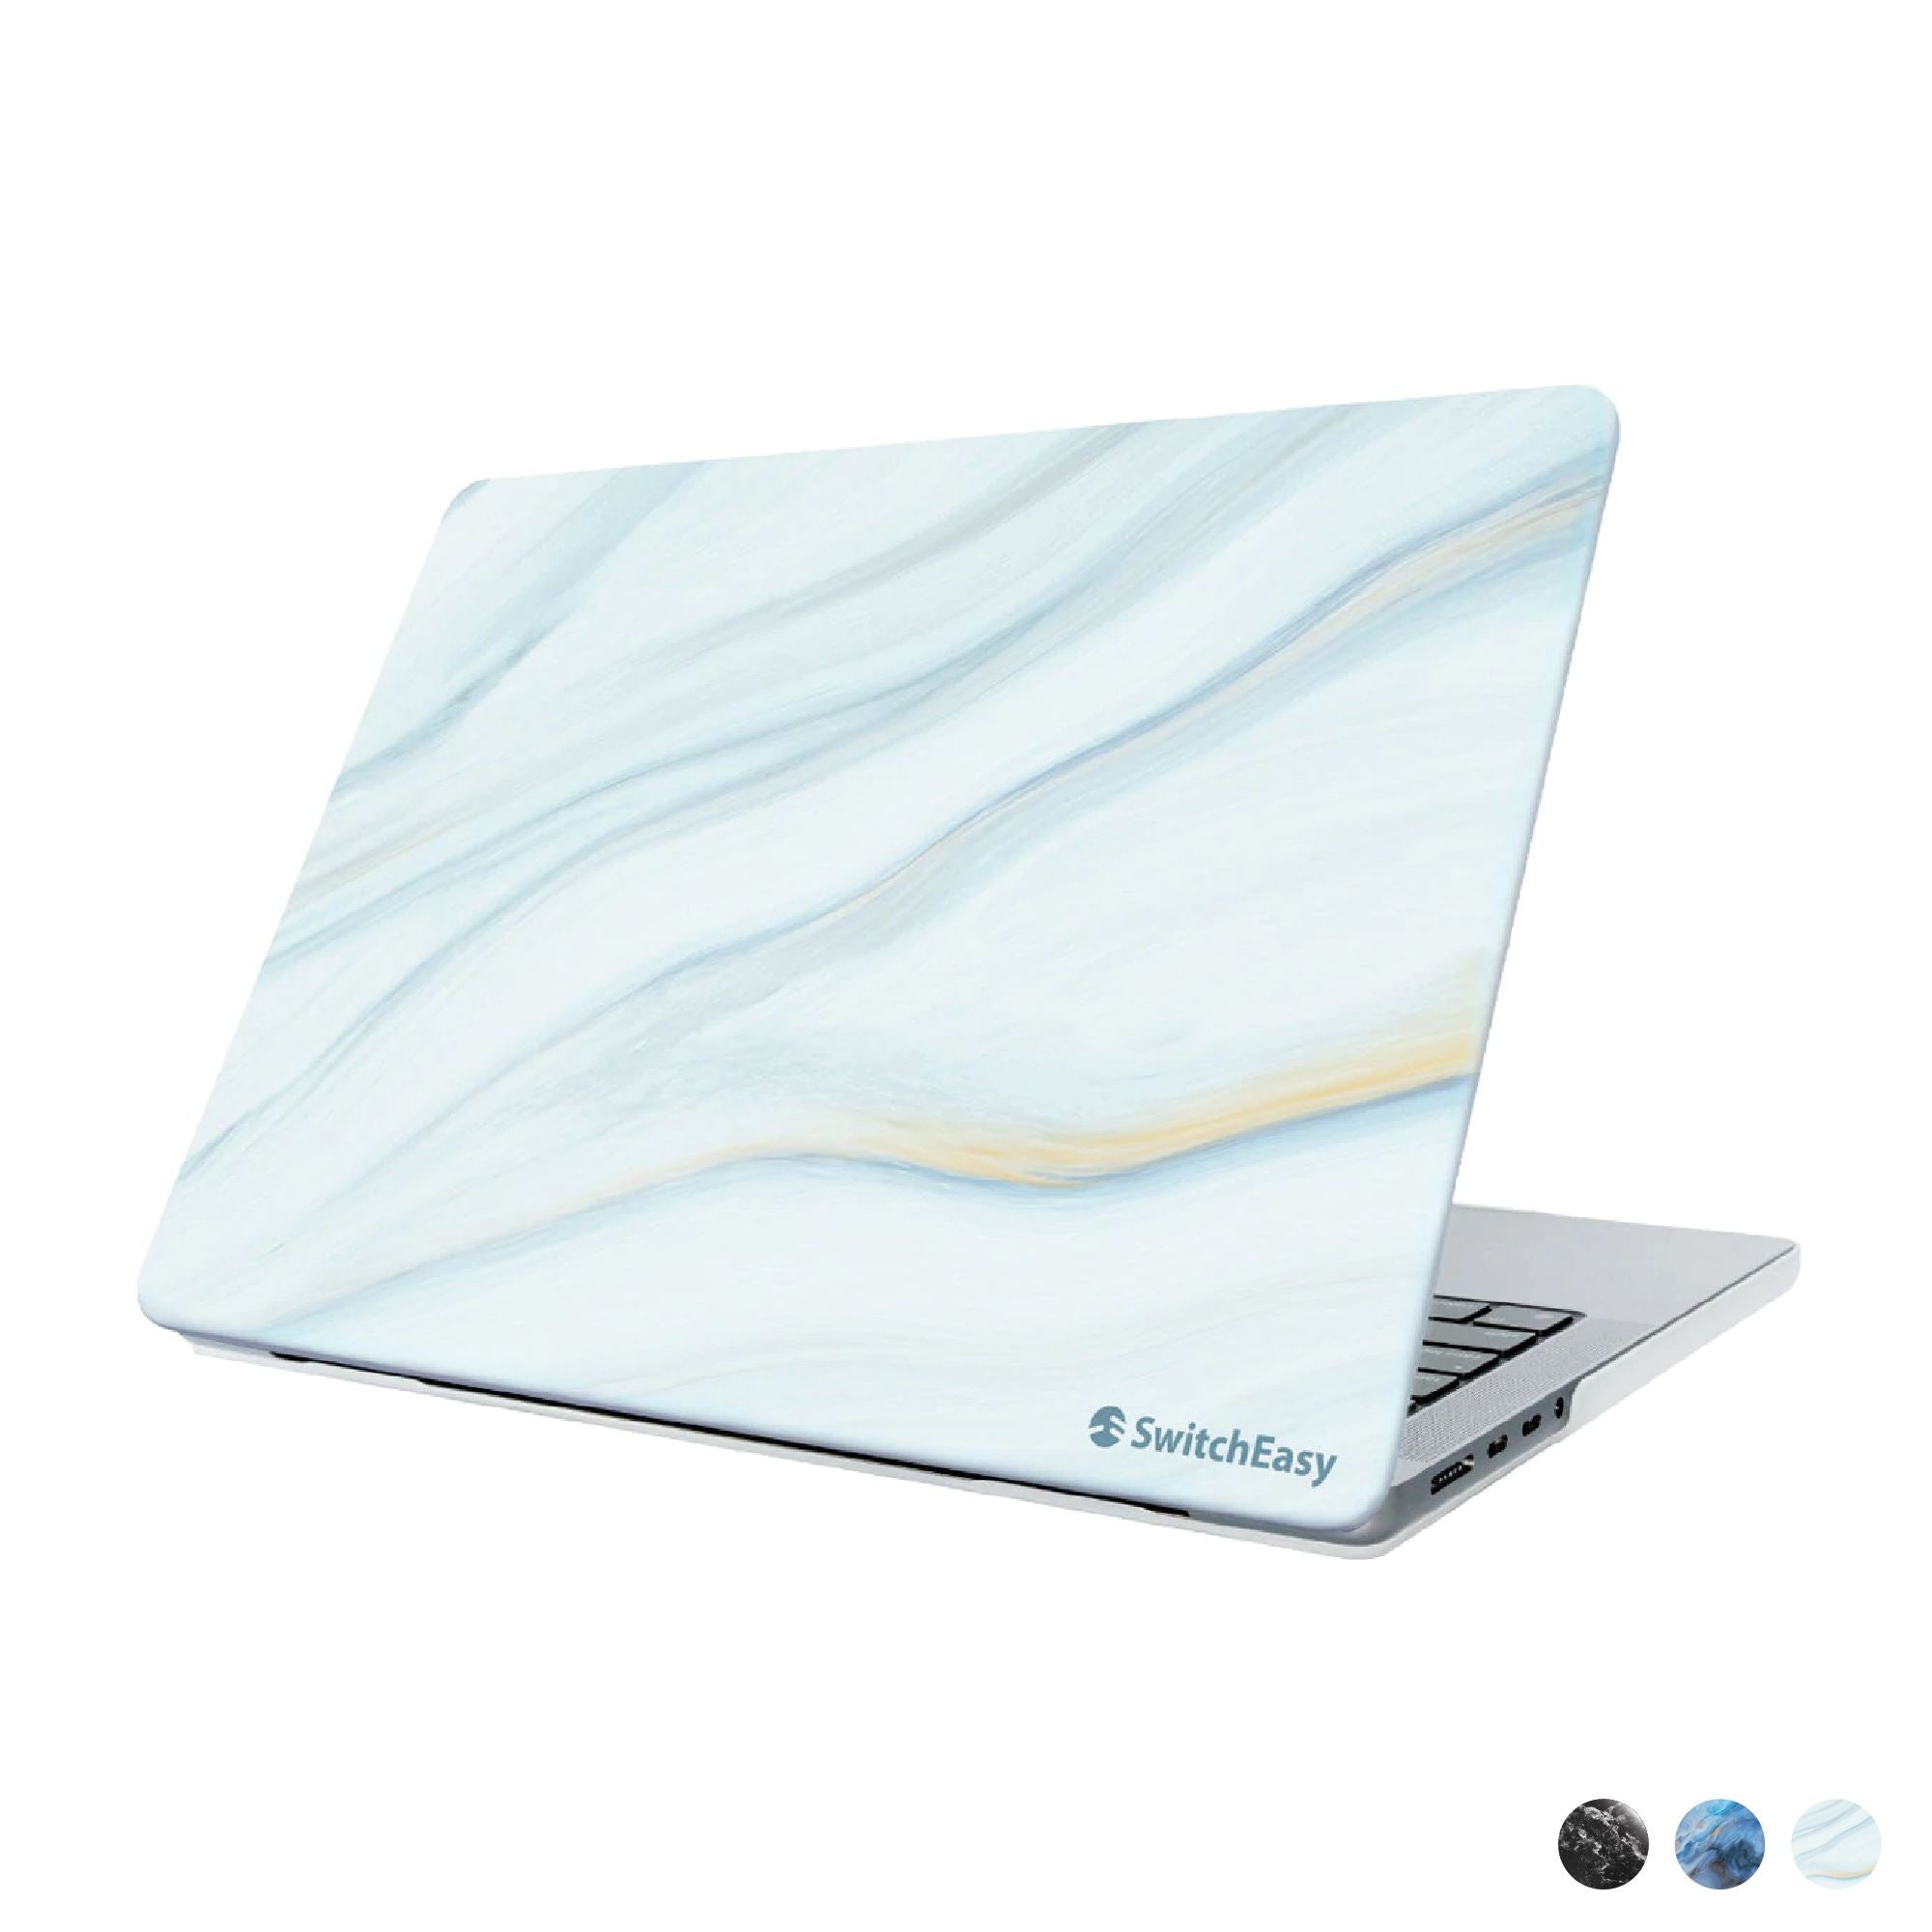 SwitchEasy Marble MacBook Protective Case for MacBook Pro 13"(M1/Intel) Default SwitchEasy 